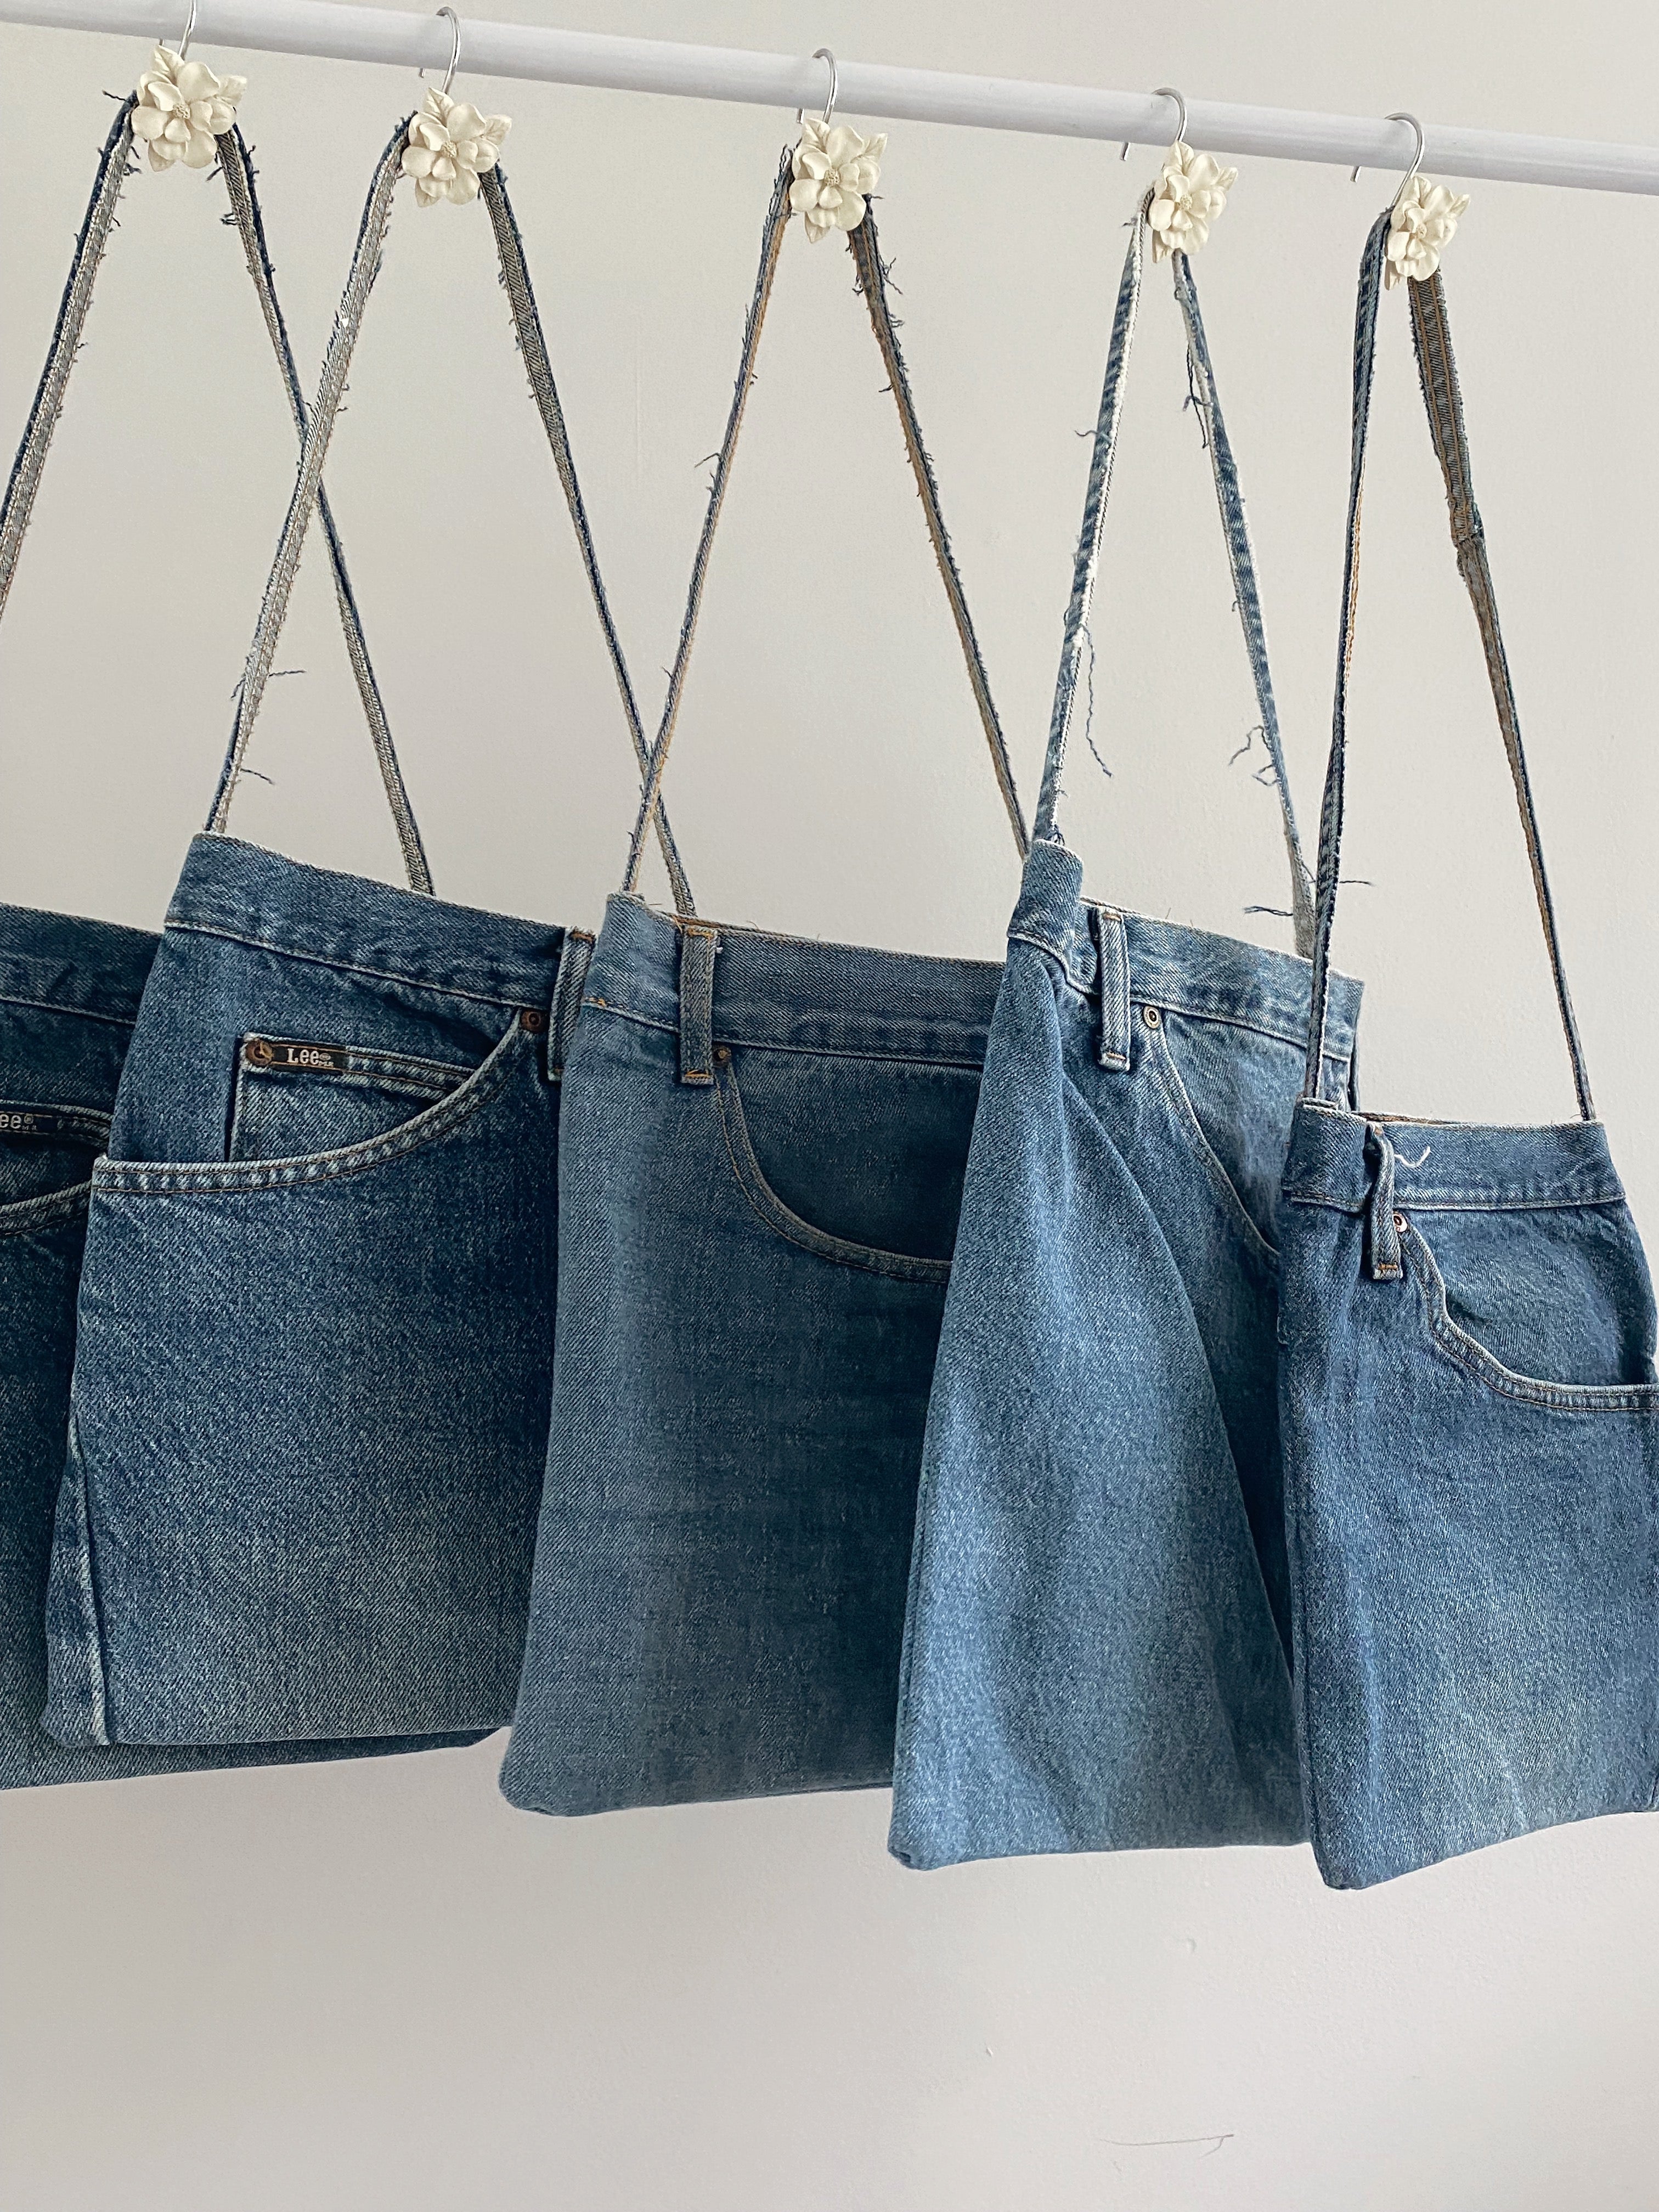 Buy Recycled Jeans Bag Large Denim Bag Jeans Handbag Denim Handbag Jeans  Bag Purse Denim Purse Bag Jeans Purse Denim Purse Denim Bag Bag Women  Online in India - Etsy